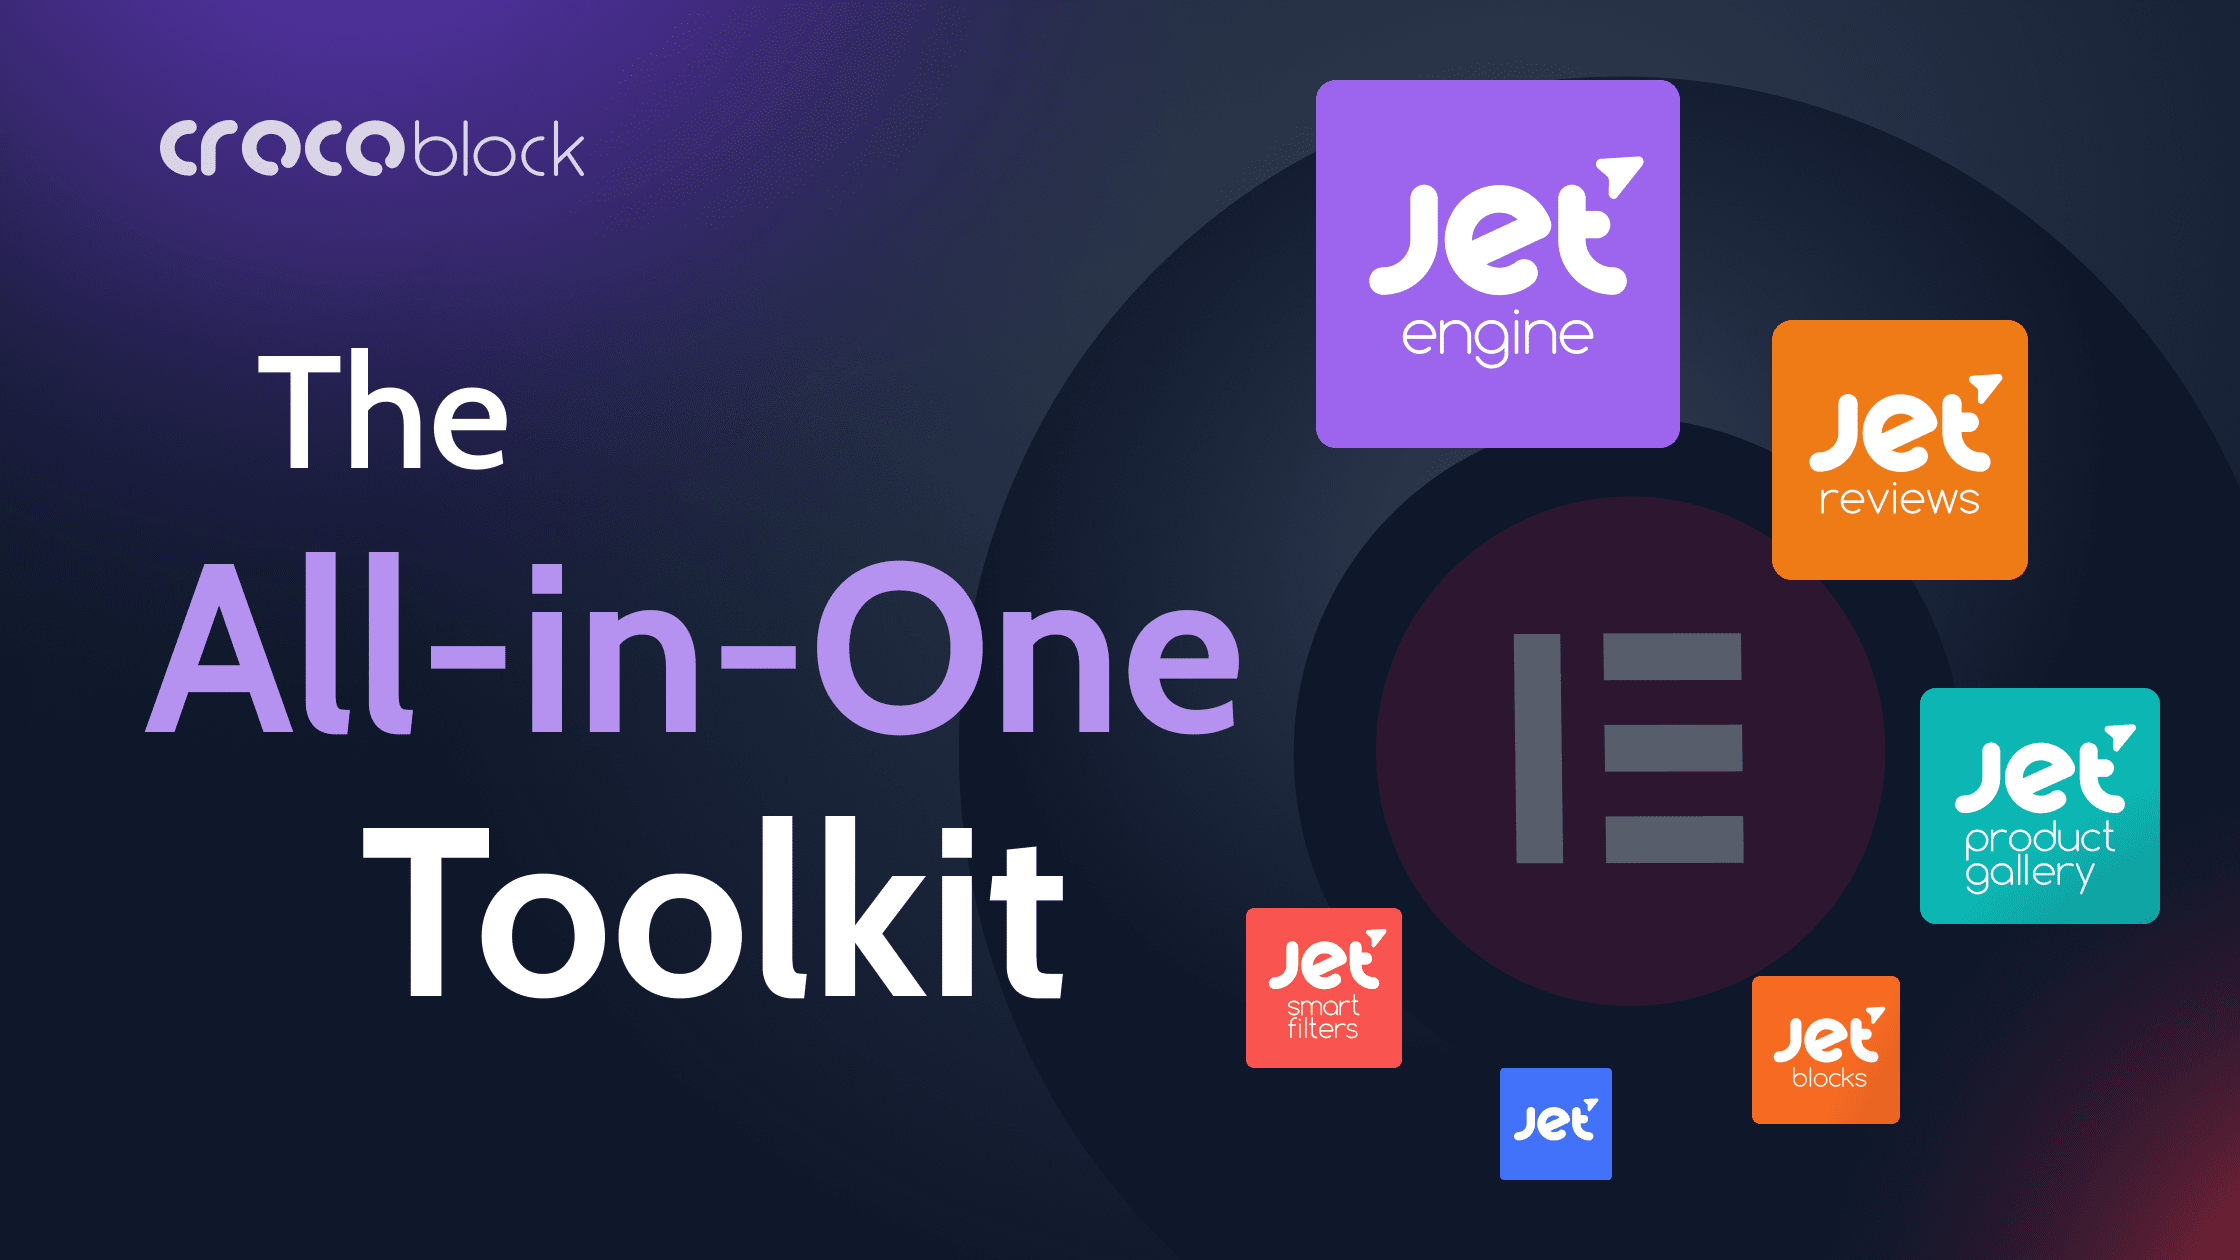 crocoblock the all in one toolkit for building websites